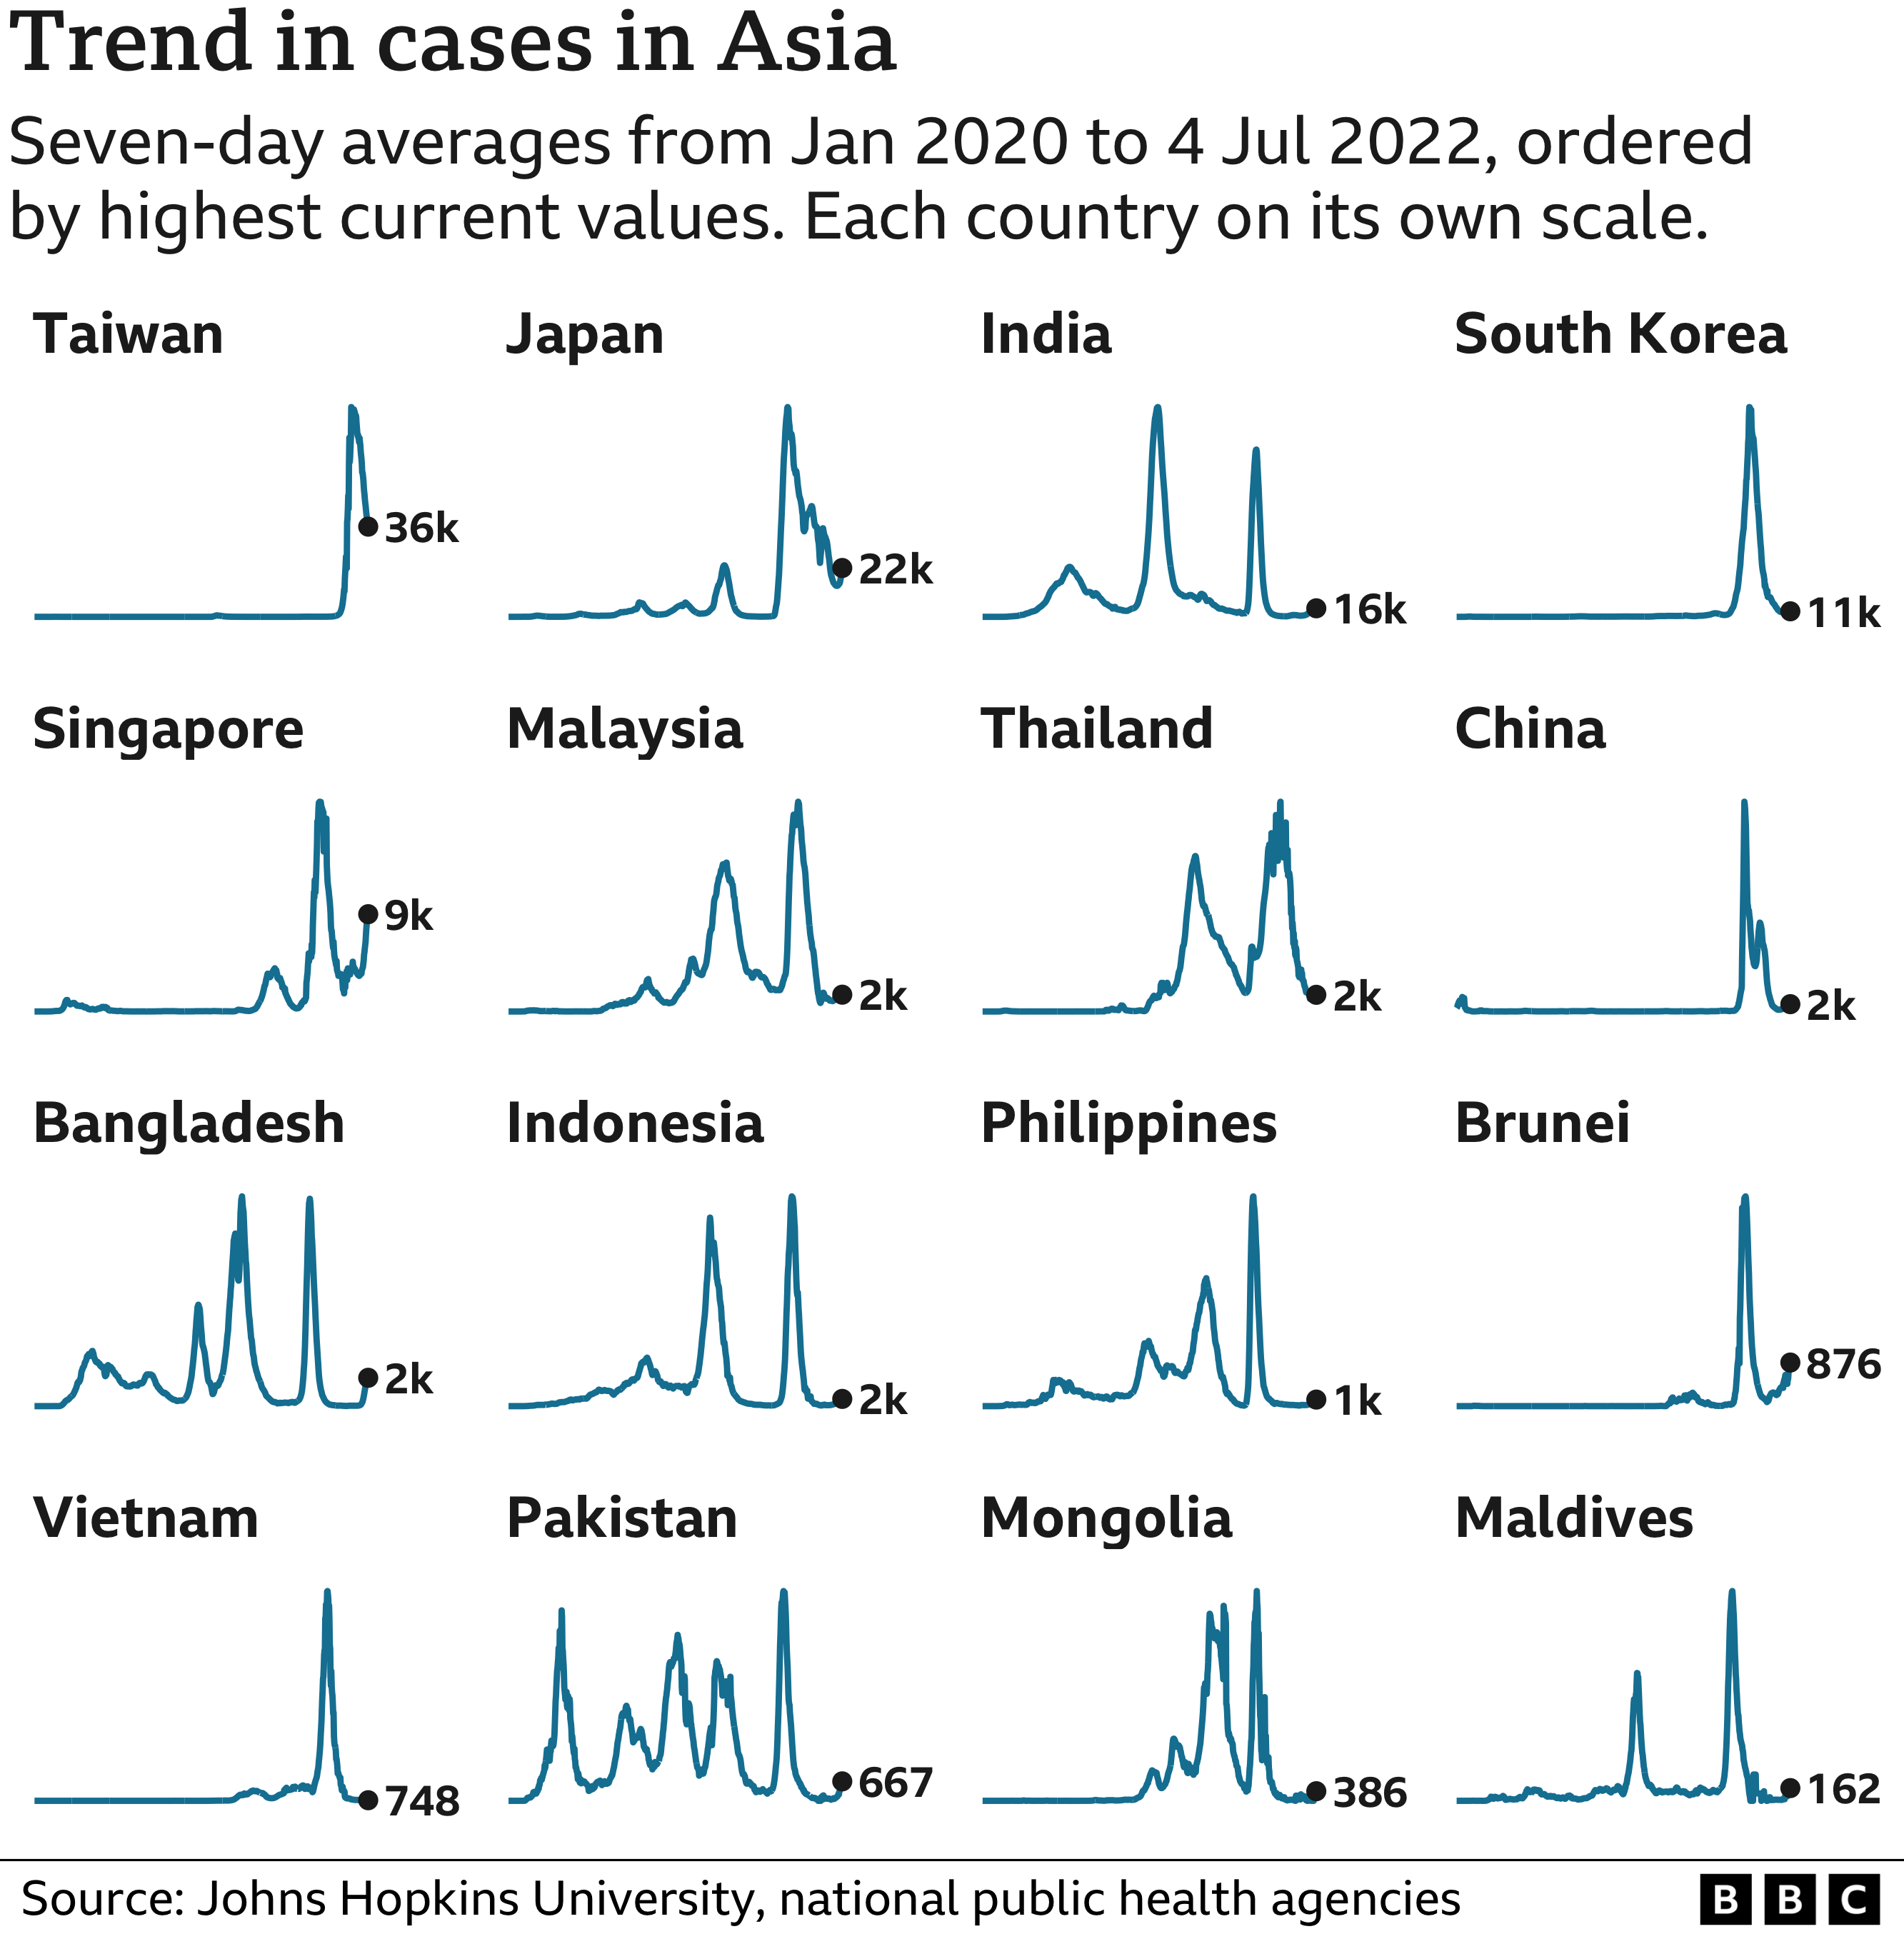 Trend in cases chart for countries in Asia